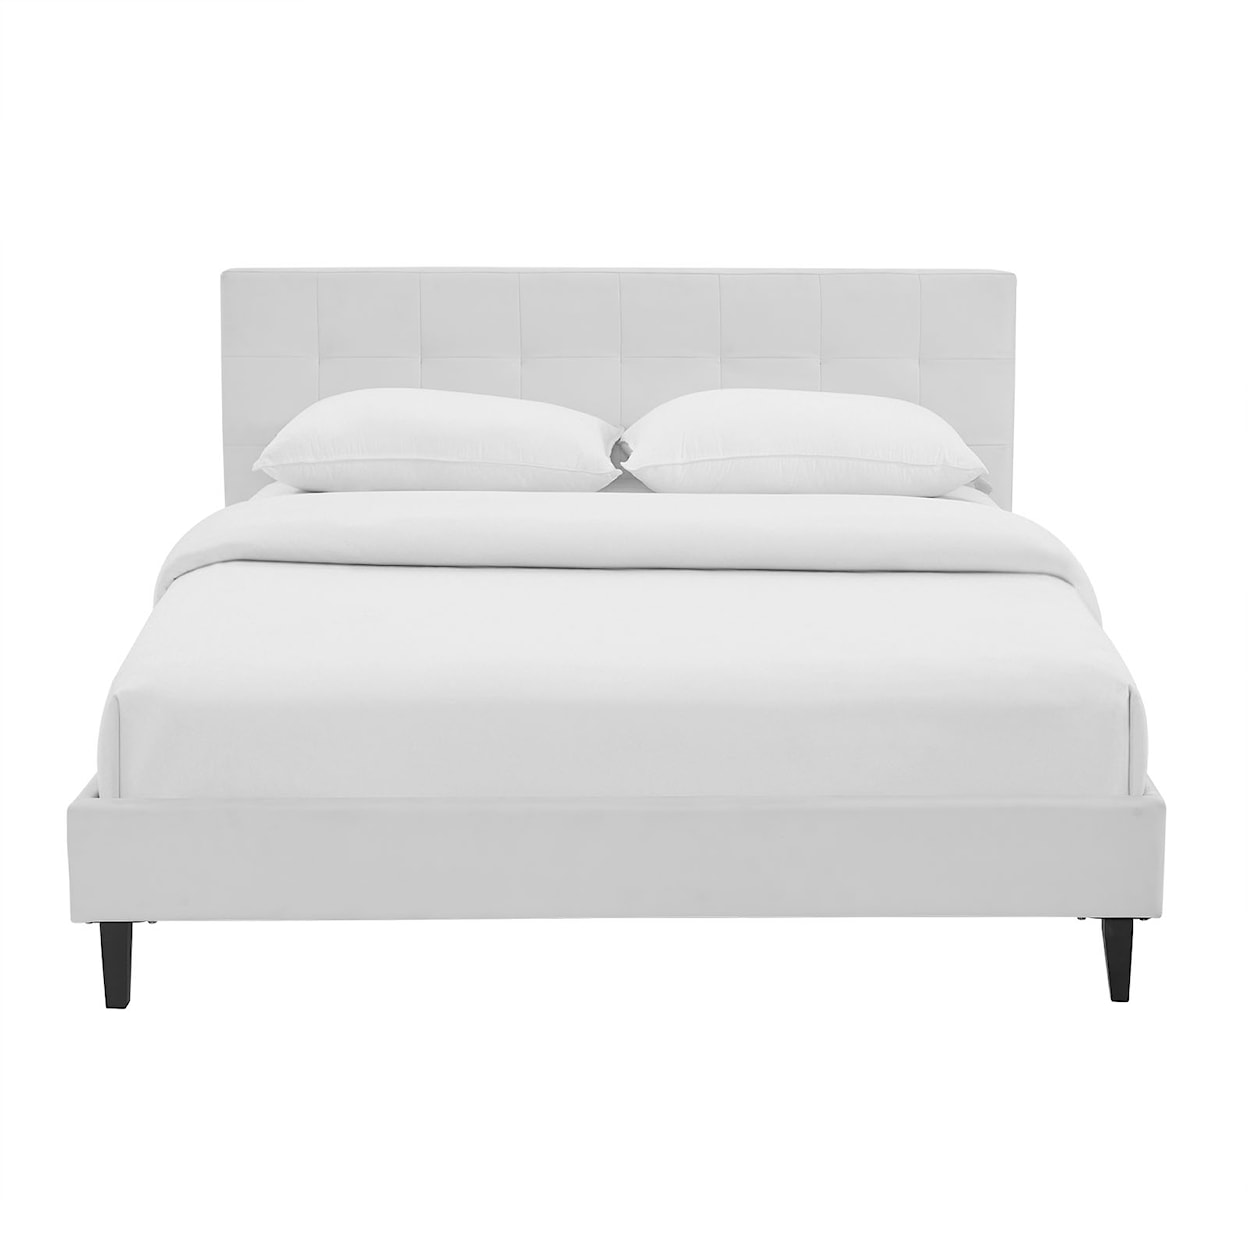 Modway Linnea Queen Faux Leather Bed